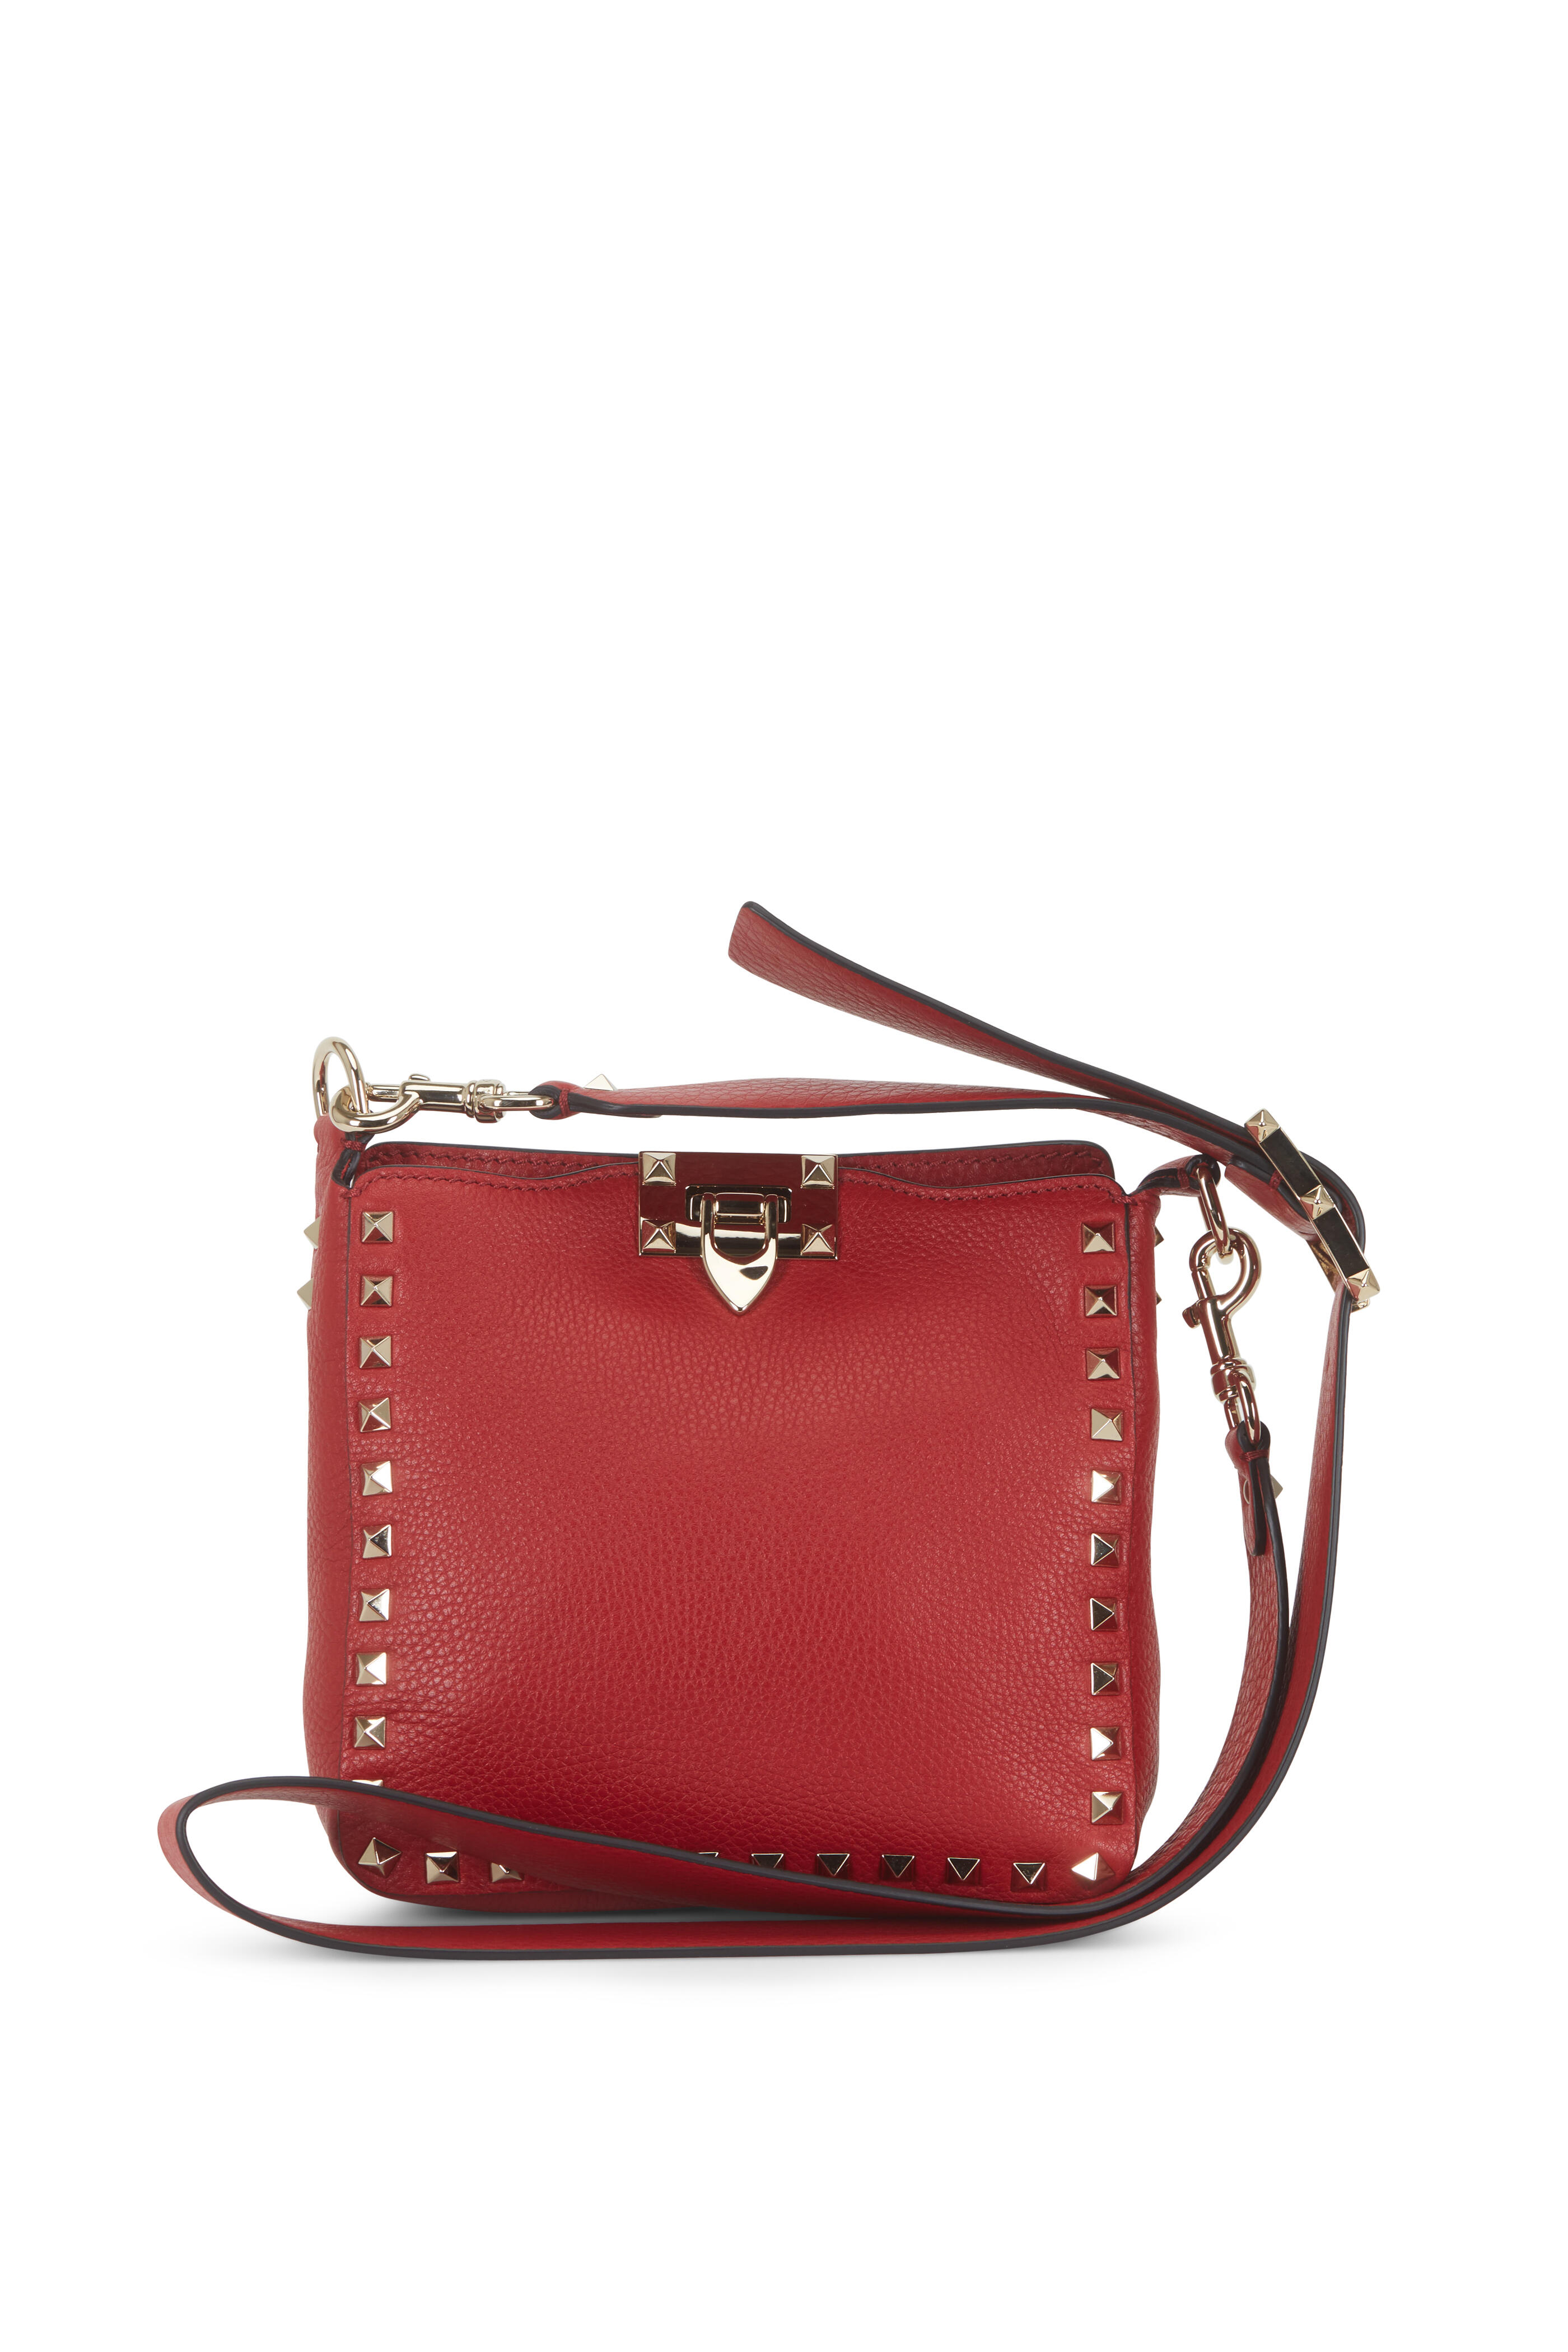 Valentino Red Pebbled Leather Rockstud Double Handle Crossbody Satchel